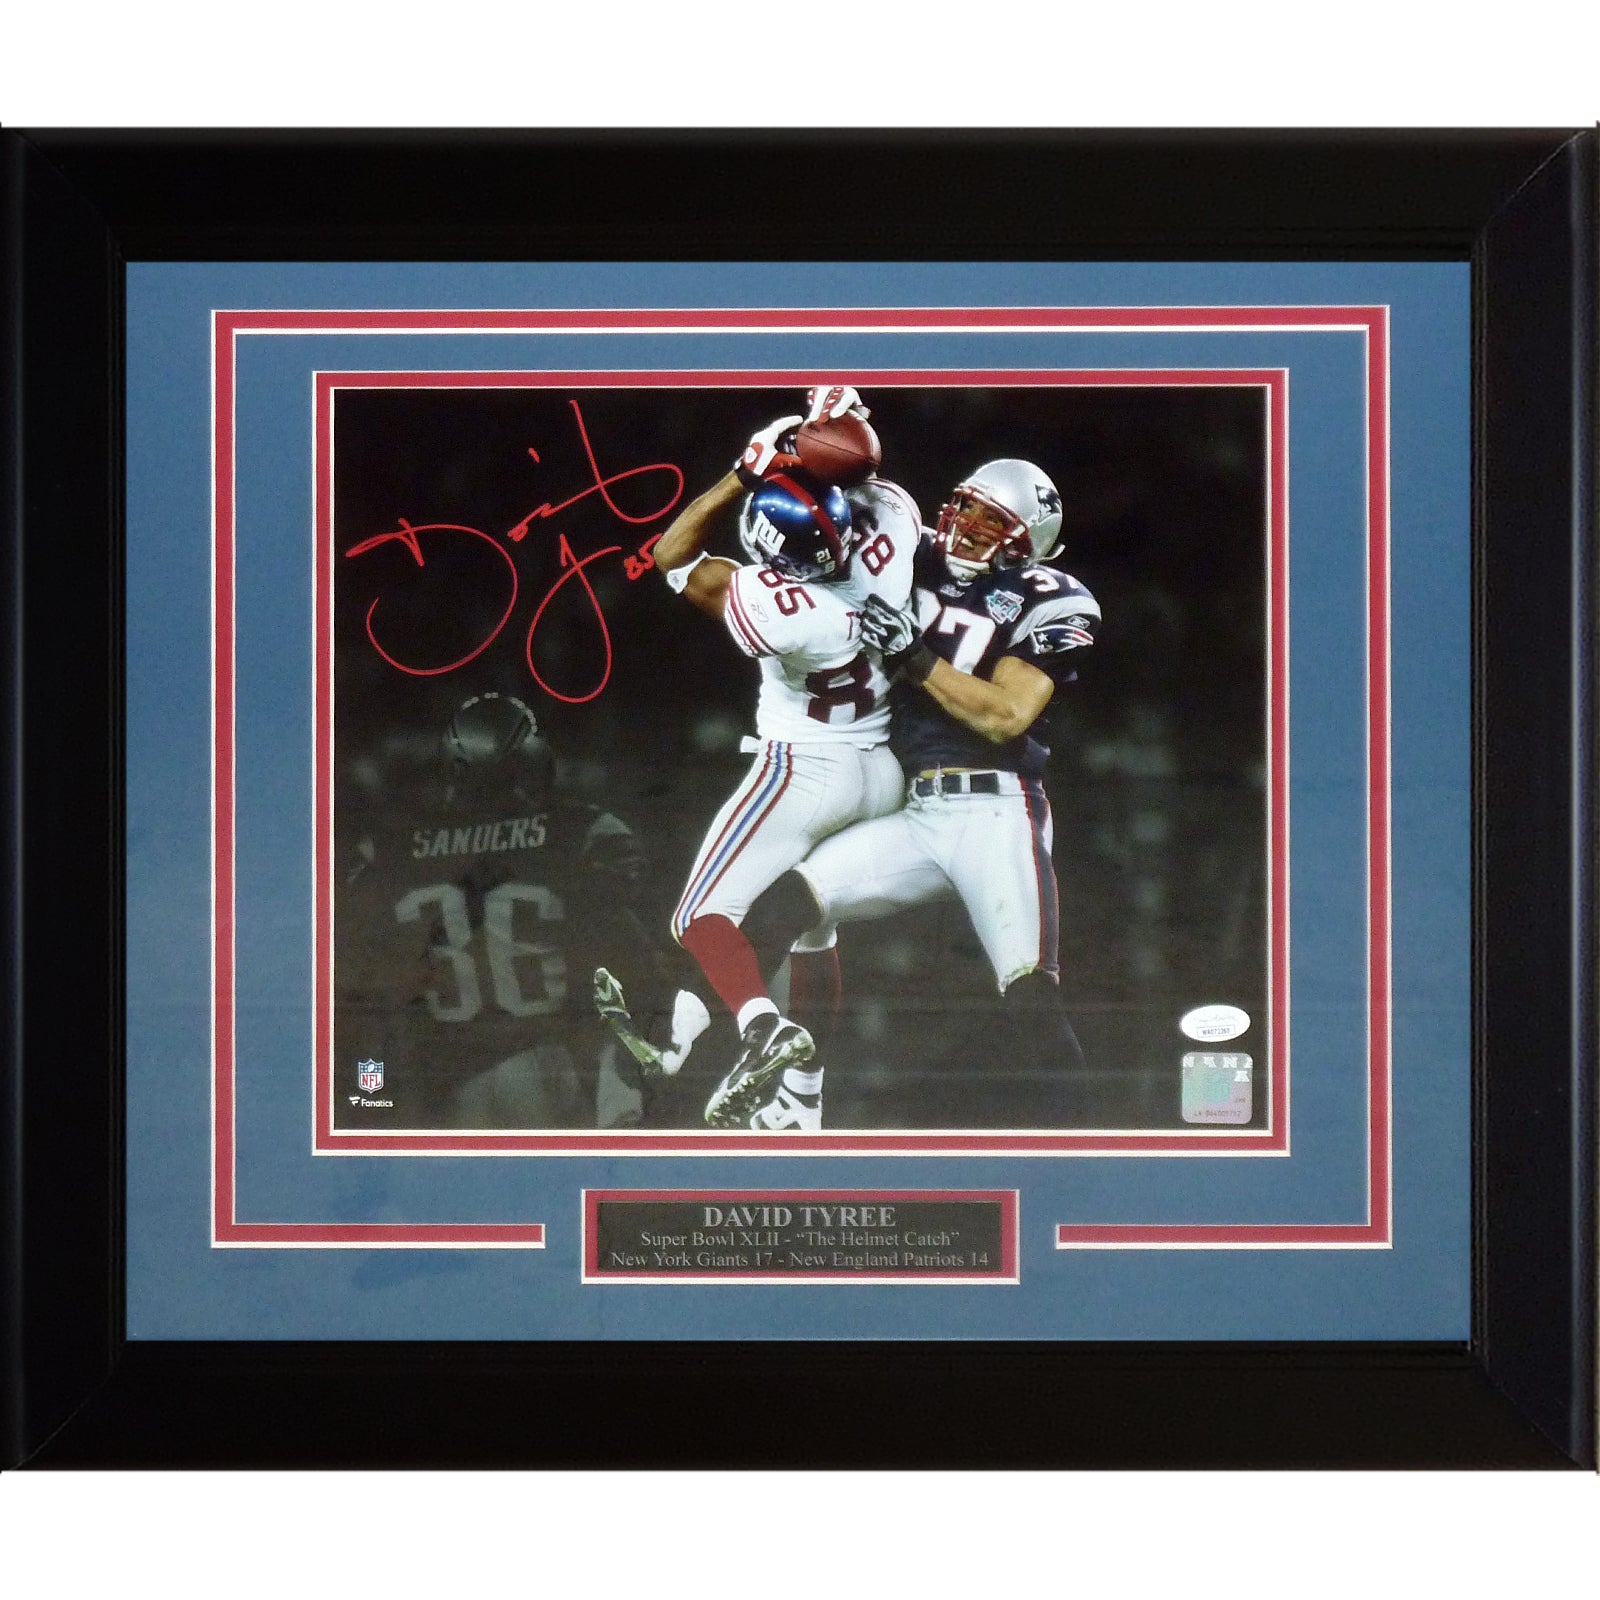 David Tyree Autographed New York Giants (Super Bowl XLII Catch) Deluxe Framed 11x14 Photo - JSA